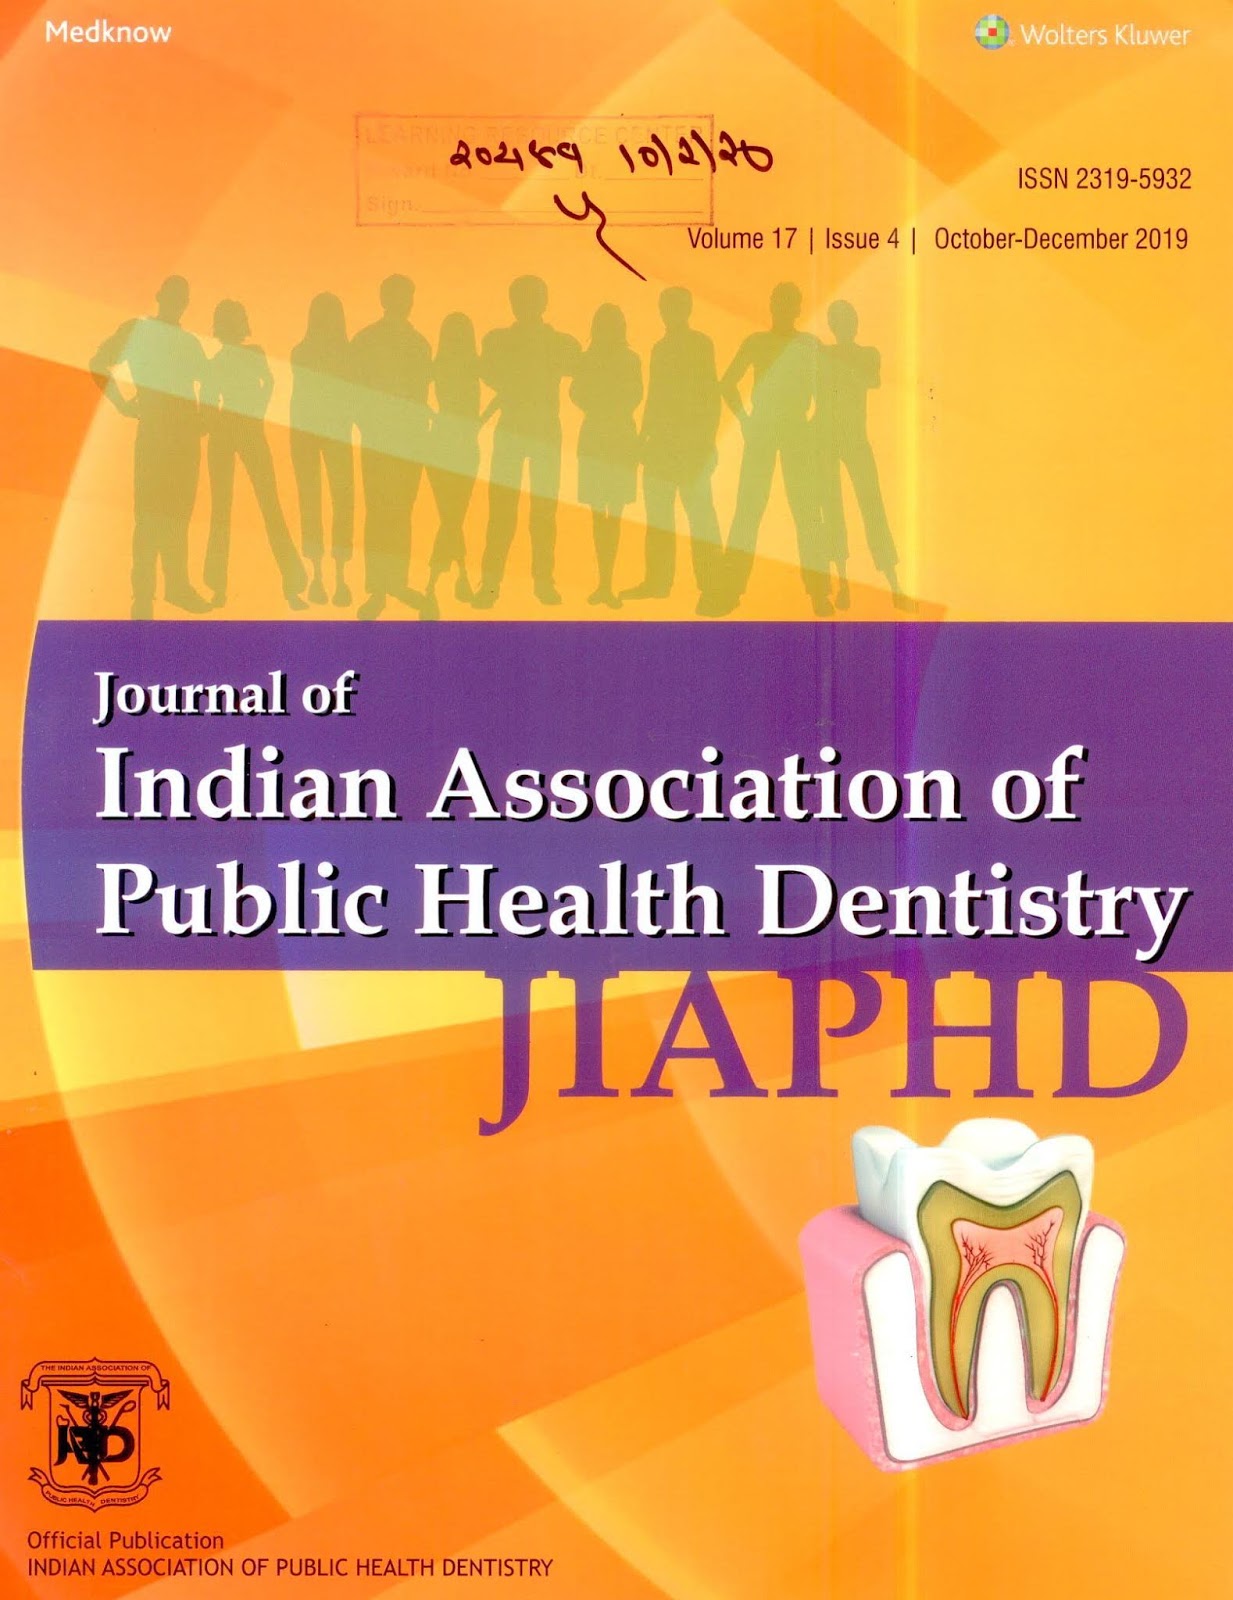 http://www.jiaphd.org/showBackIssue.asp?issn=2319-5932;year=2019;volume=17;issue=4;month=October-December